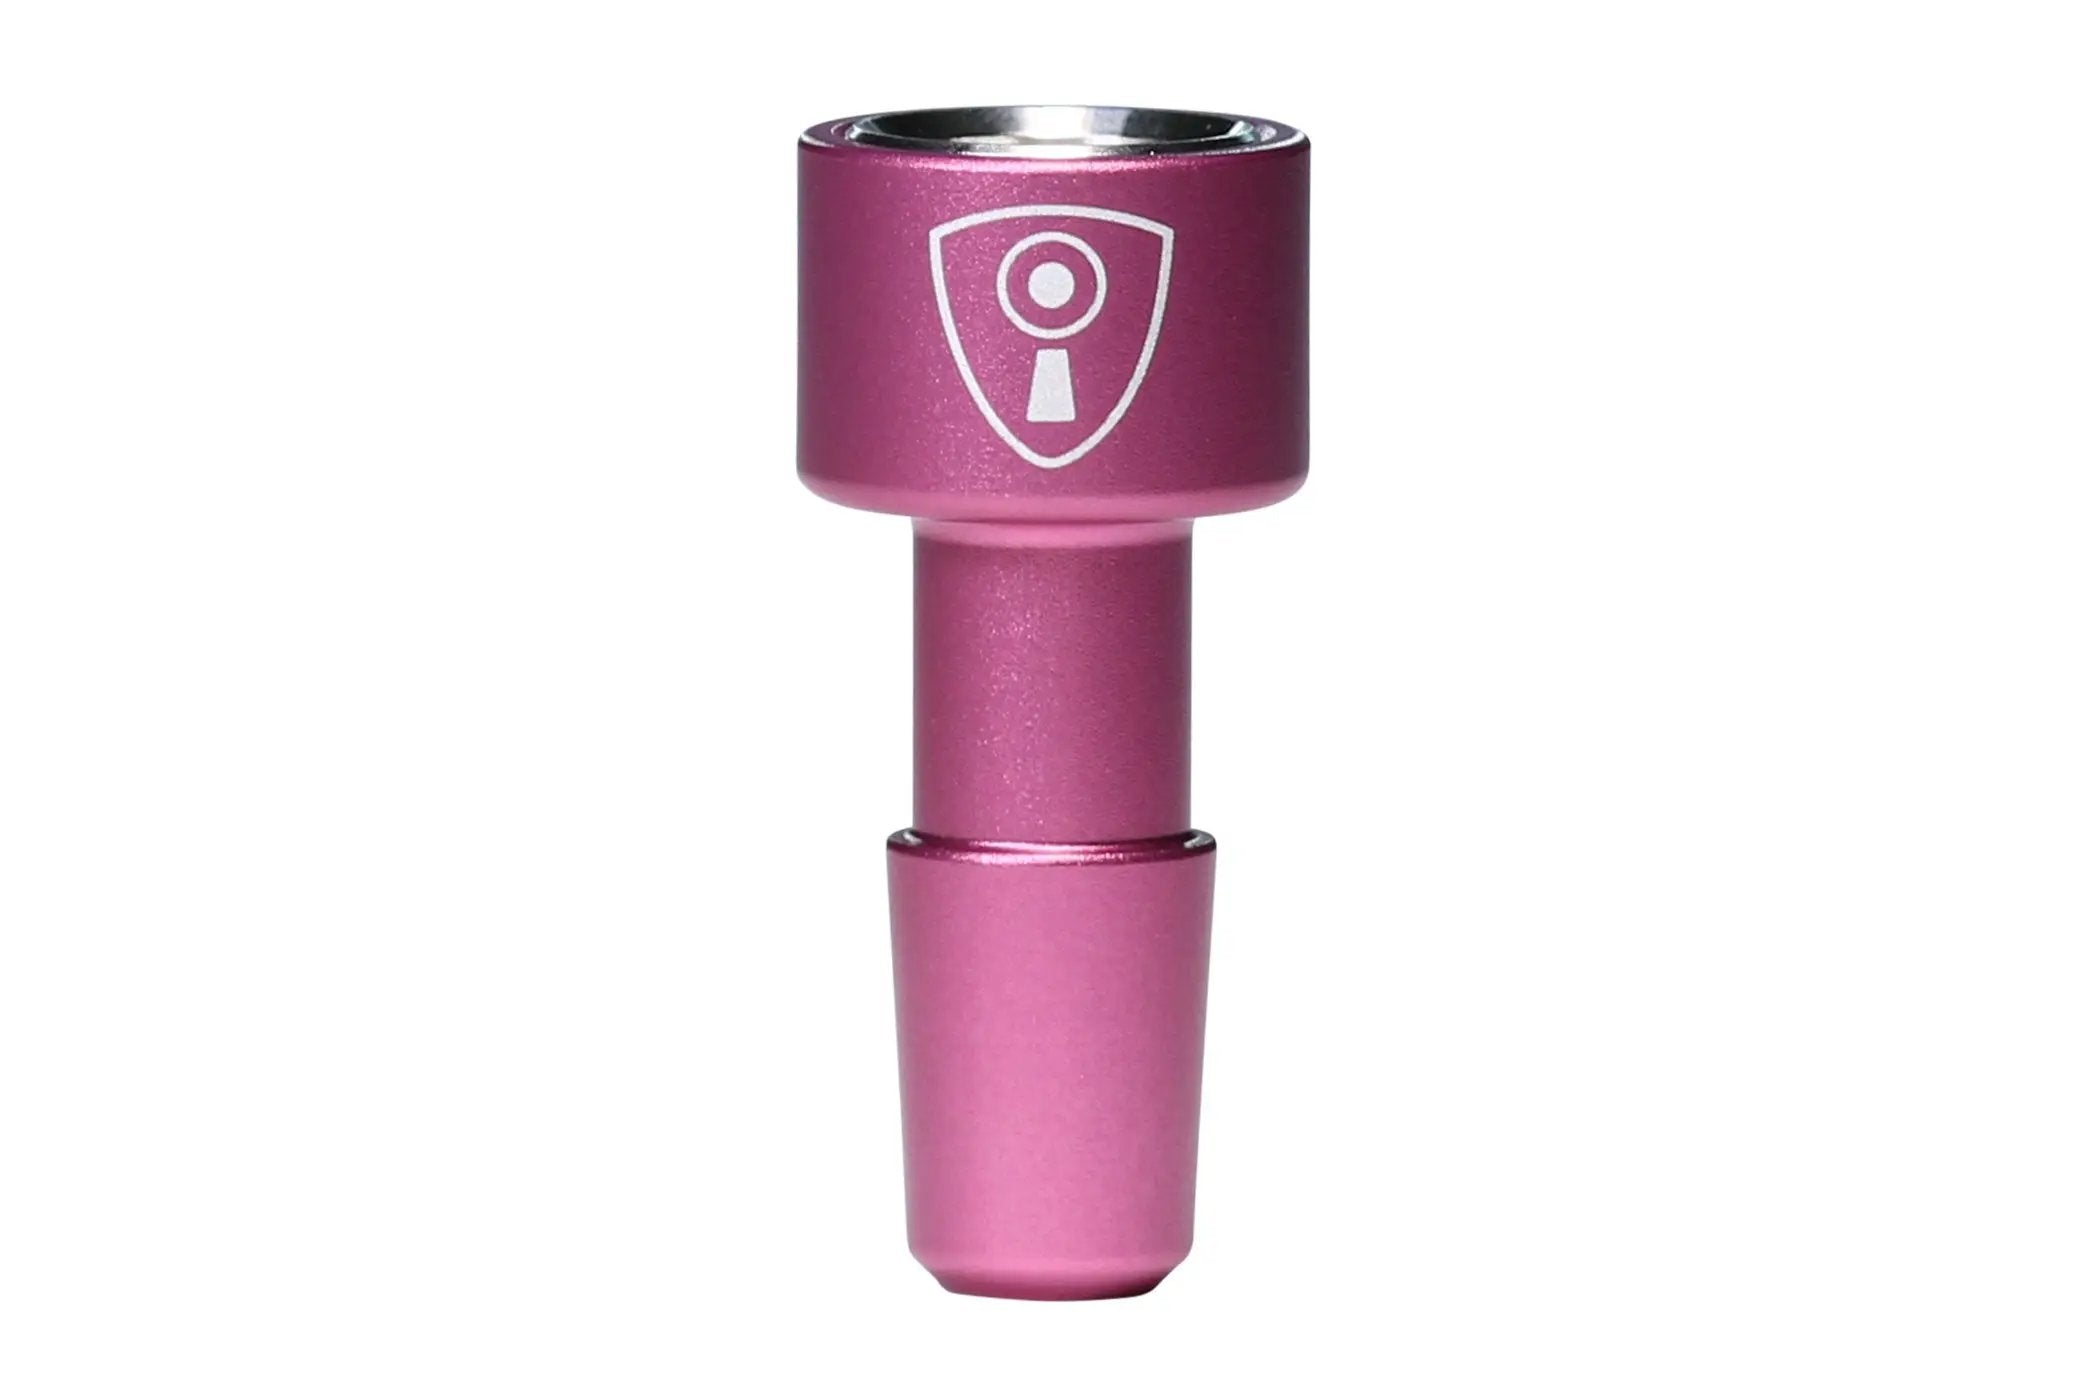 Invincibowl - GERANIUM INVINCIBOWL INFINITY- PINK 14MM by Chill Steel Pipes